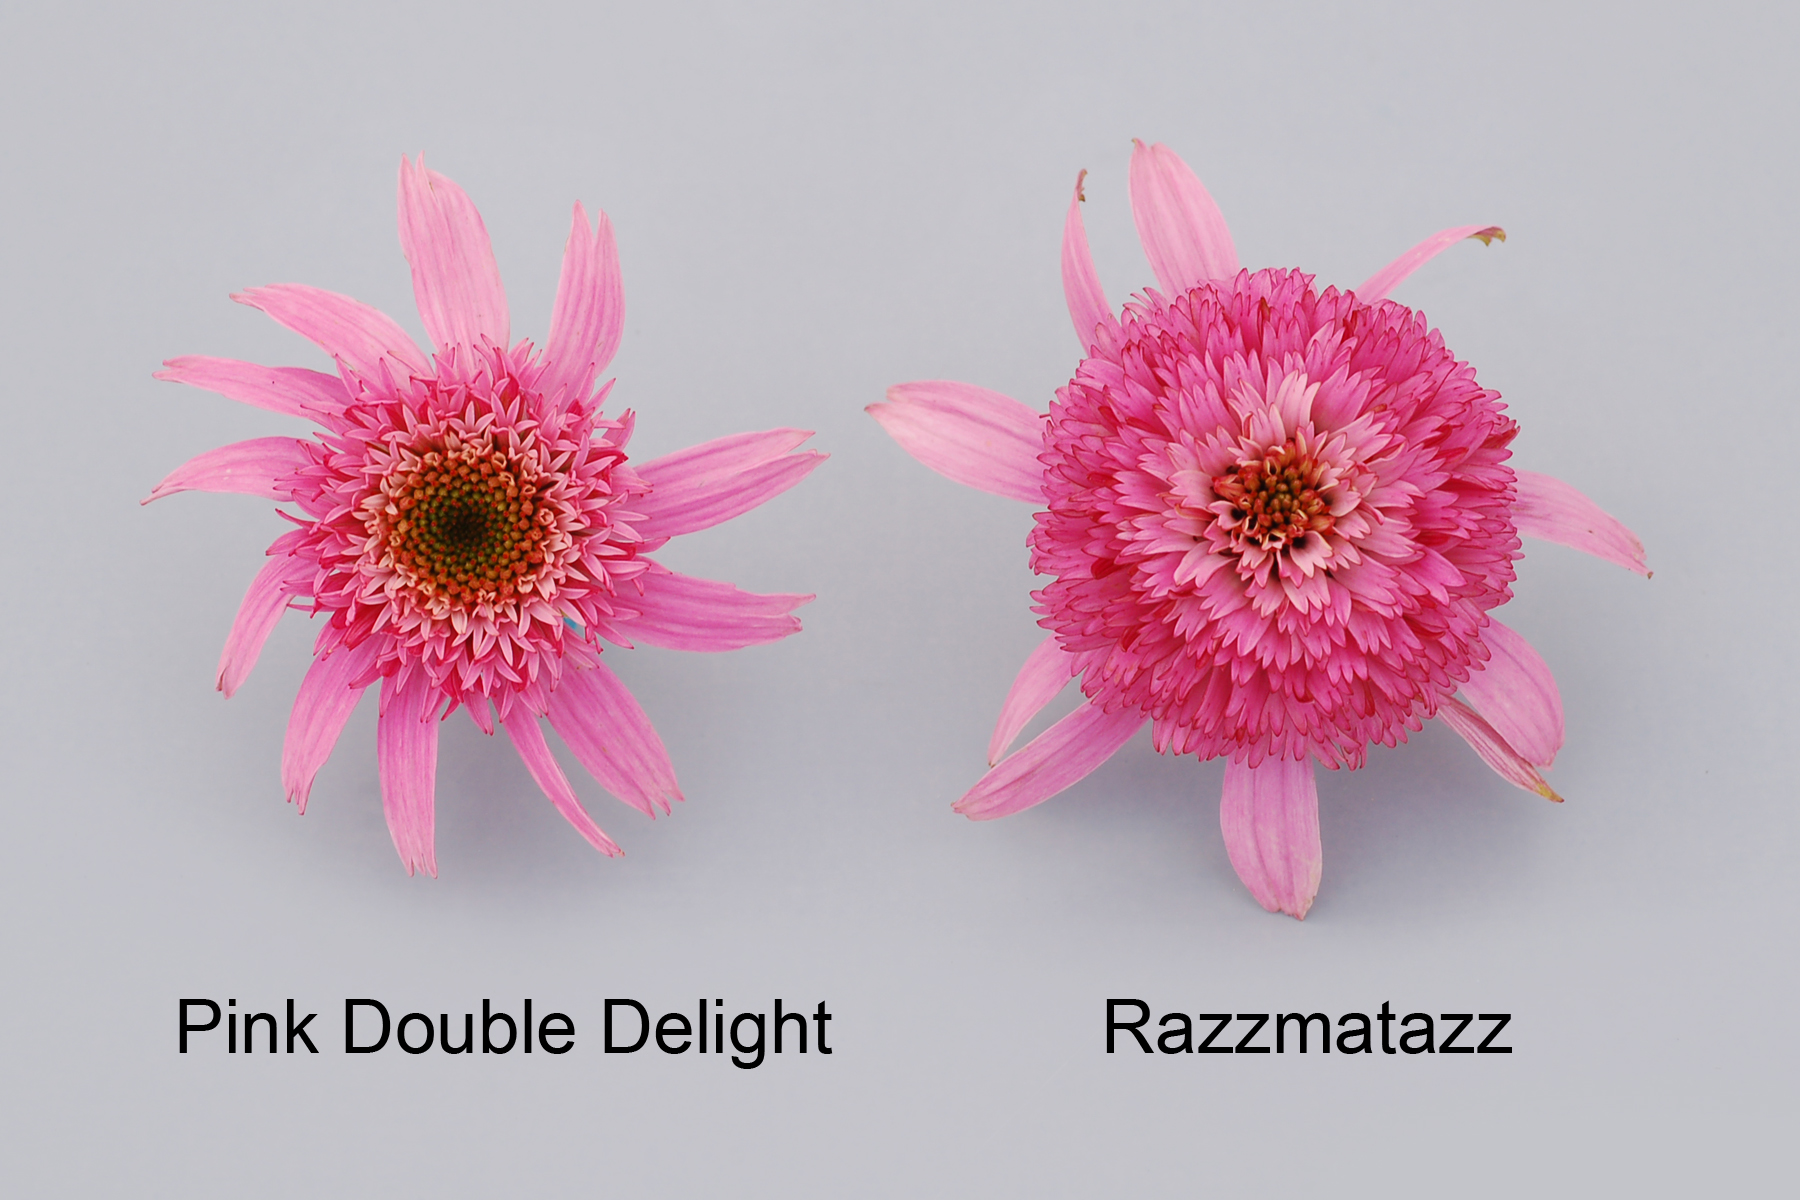 Pink Double Delight